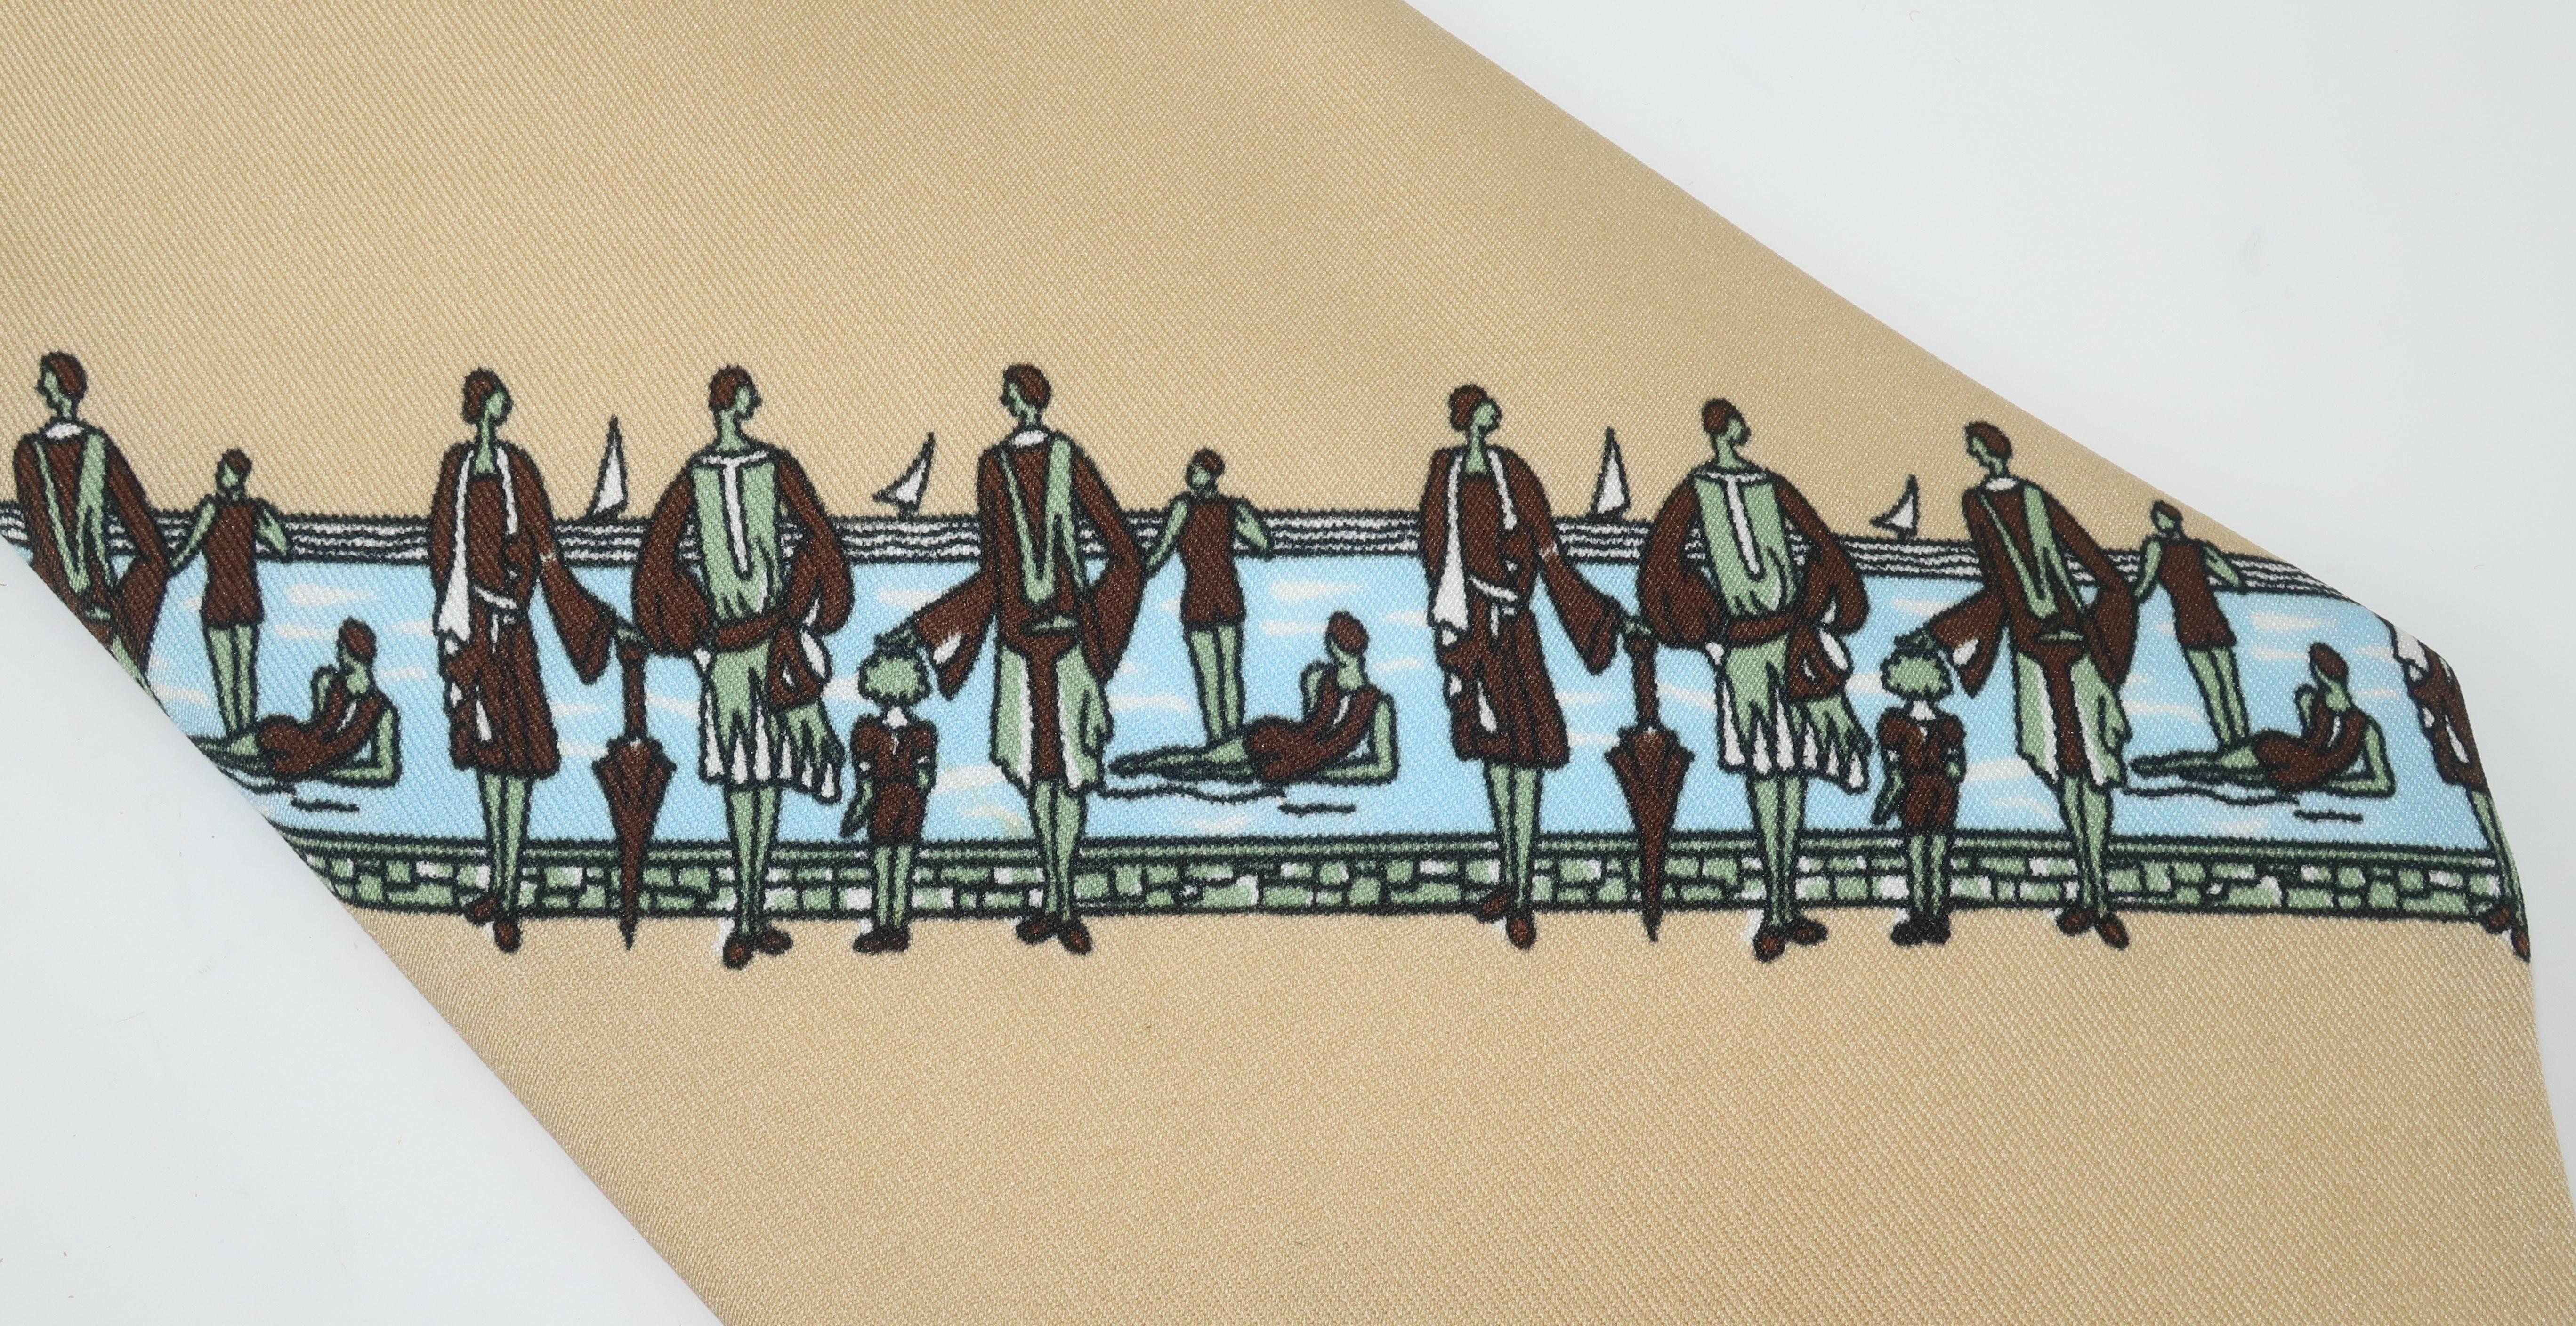 This C.1970 men's polyester necktie by Gianno proves that fashion can be fun ... as if there were ever a doubt!?  The extra wide necktie silhouette is the perfect foil for the whimsical art deco revival print depicting flapper style ladies and